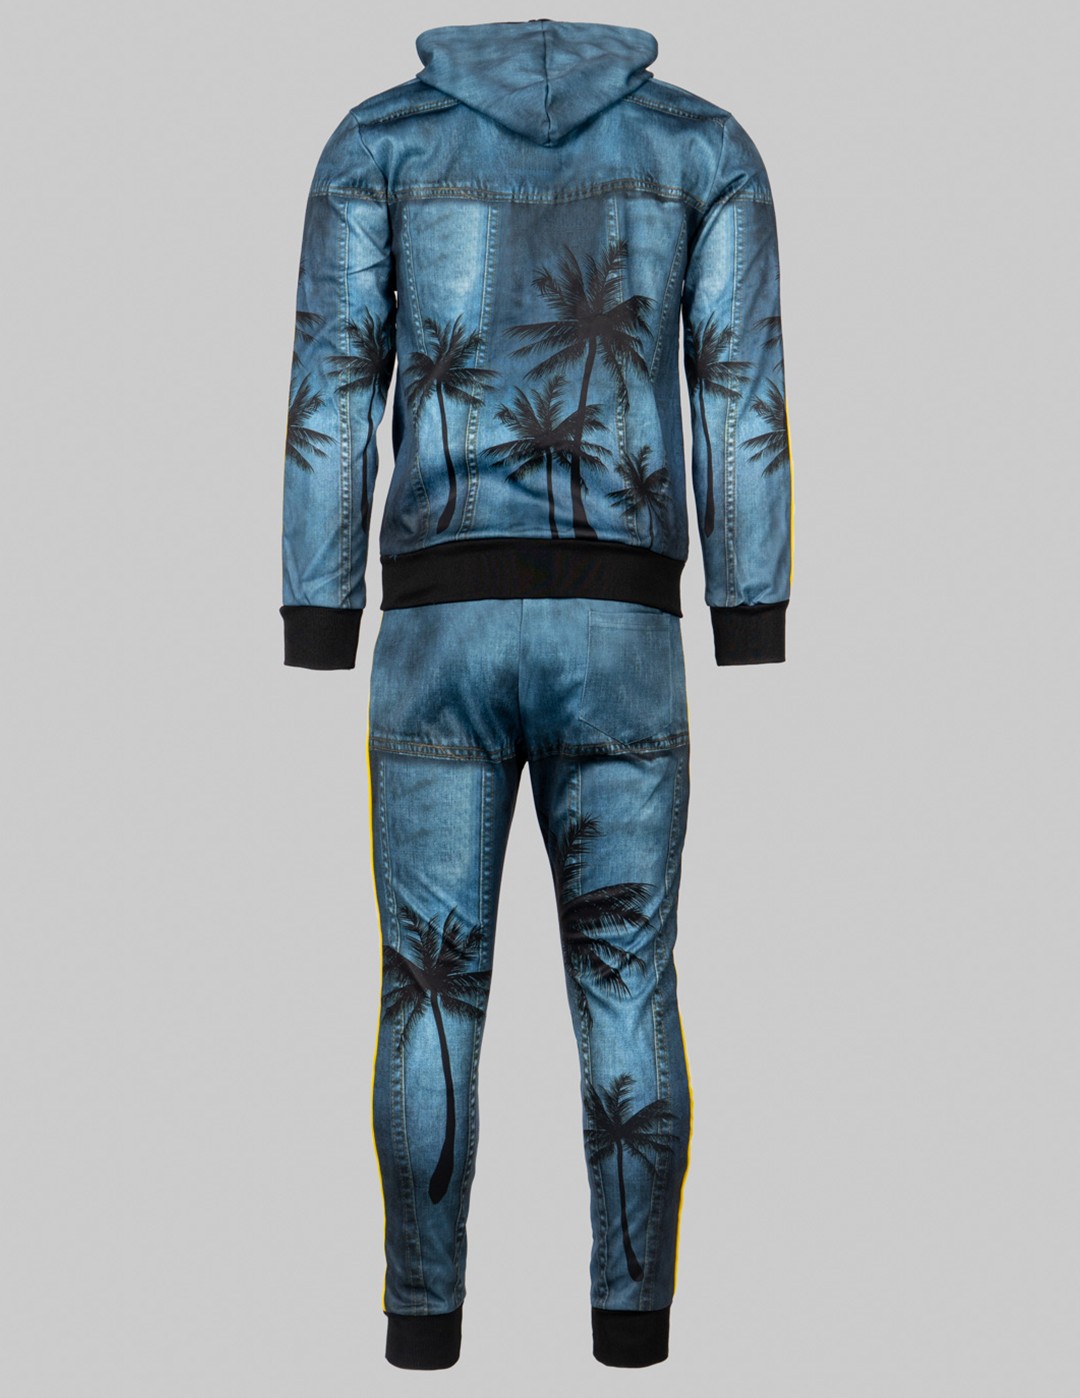 MIAMI VICE Exclusive limited series Tracksuit